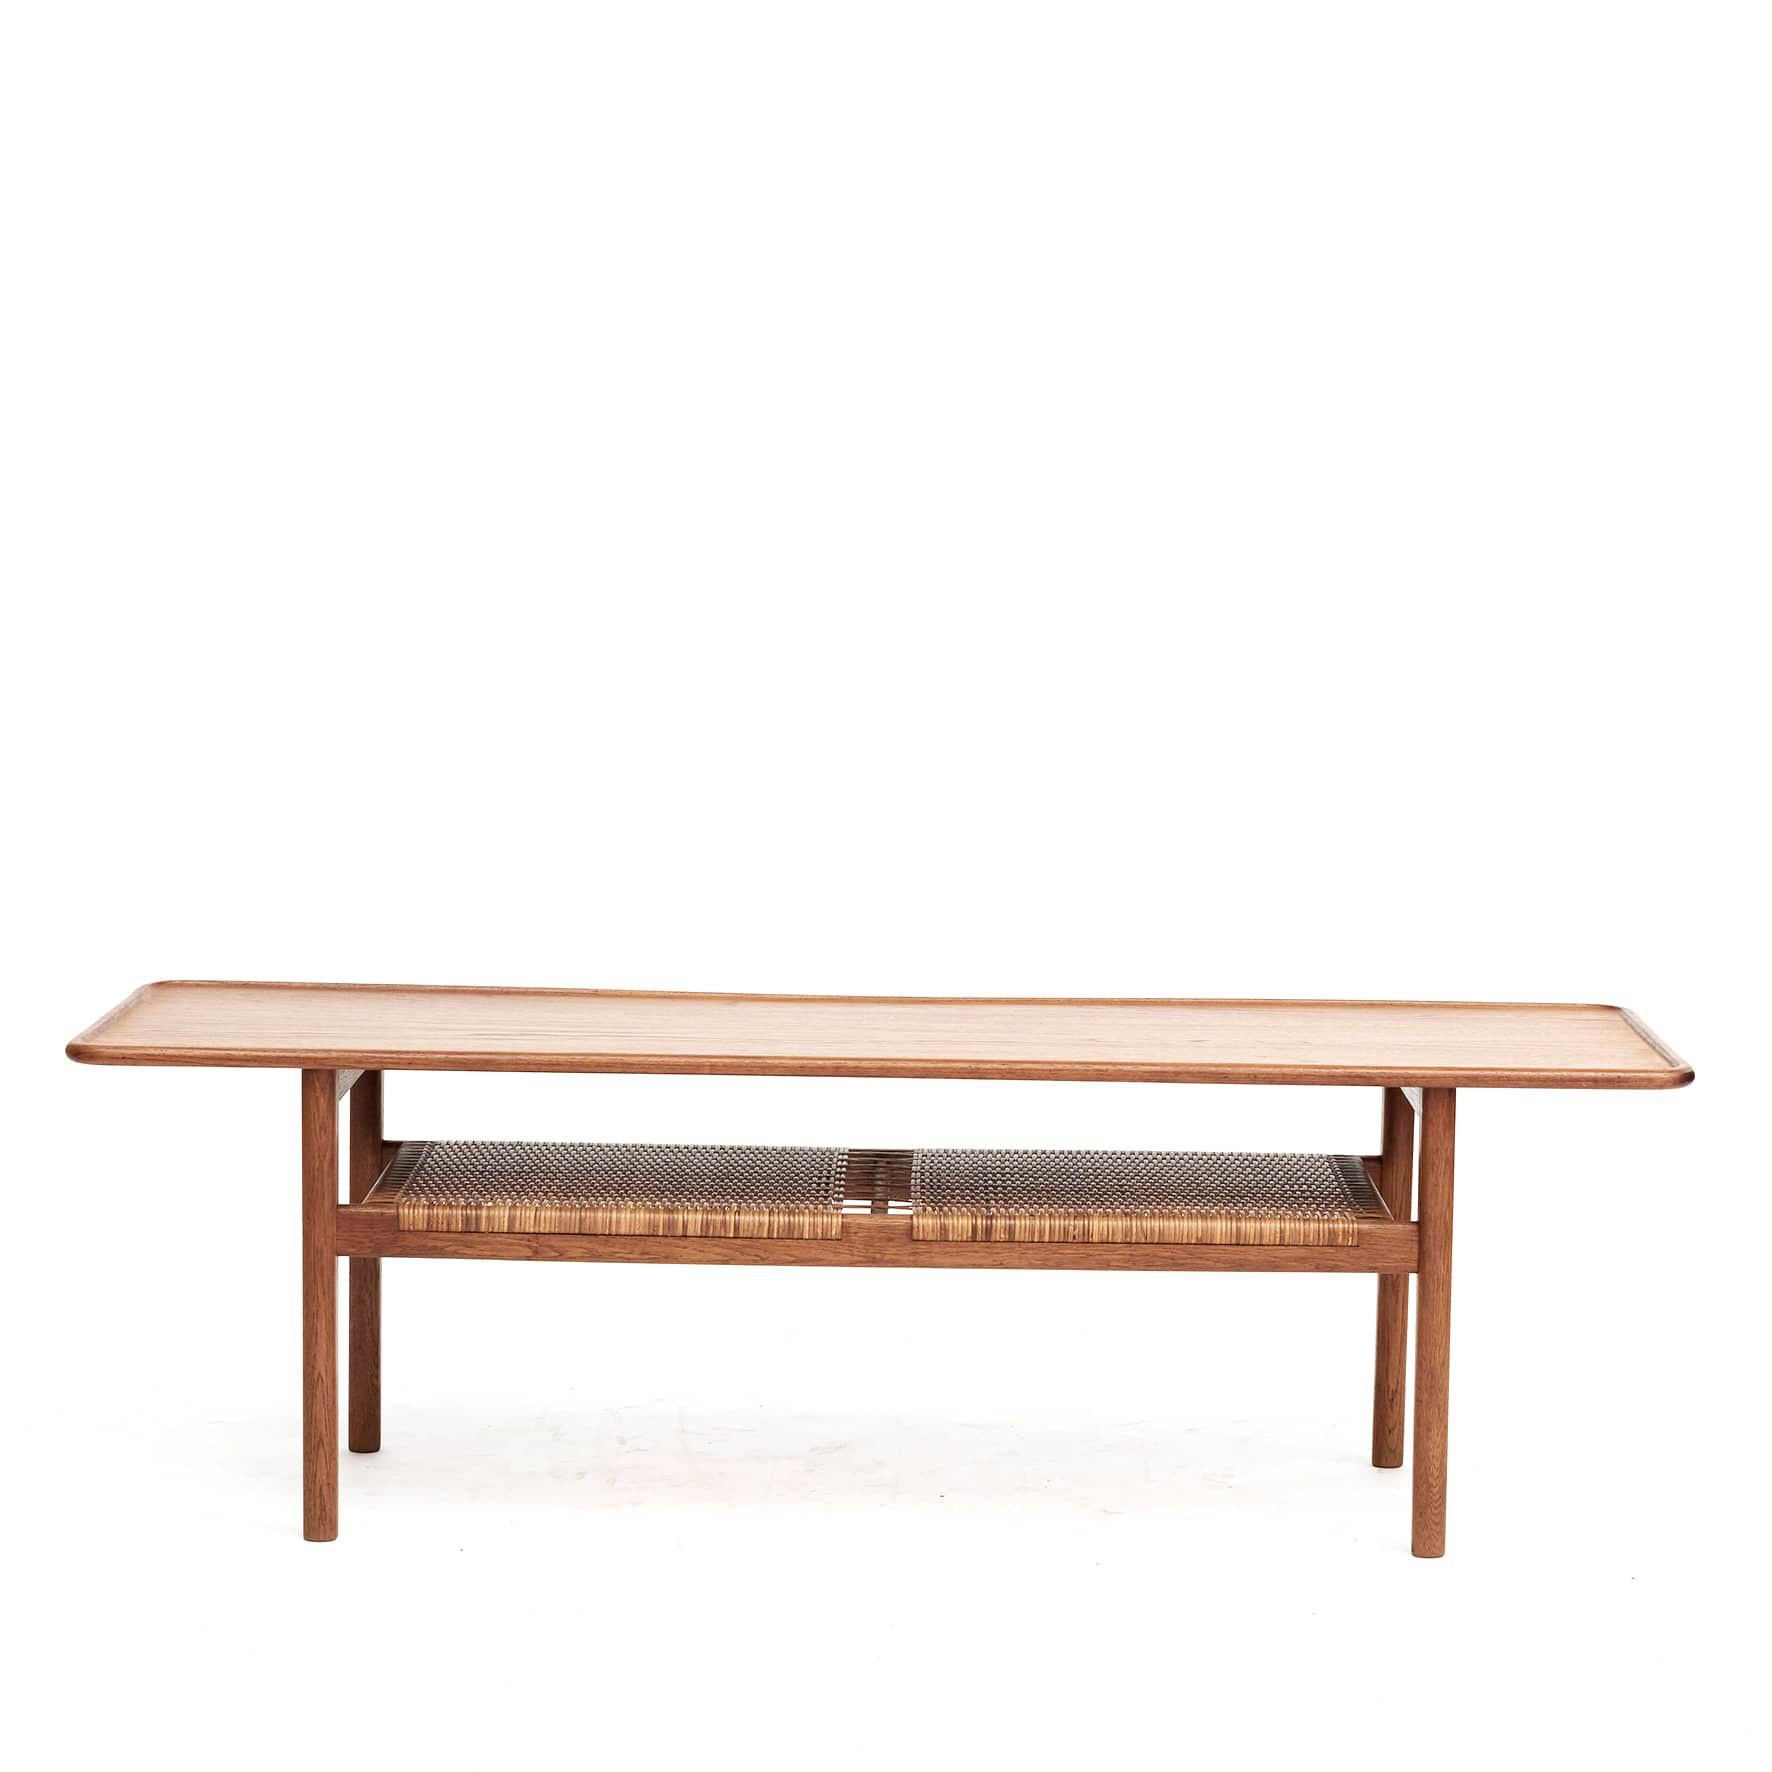 Hans J. Wegner 1914-2007.
Coffee table model AT-10 in solid teak.
Top with raised edge and an underlying woven cane shelf.
Designed in 1953, produced by Andreas Tuck.

Original condition with a new oil finish.